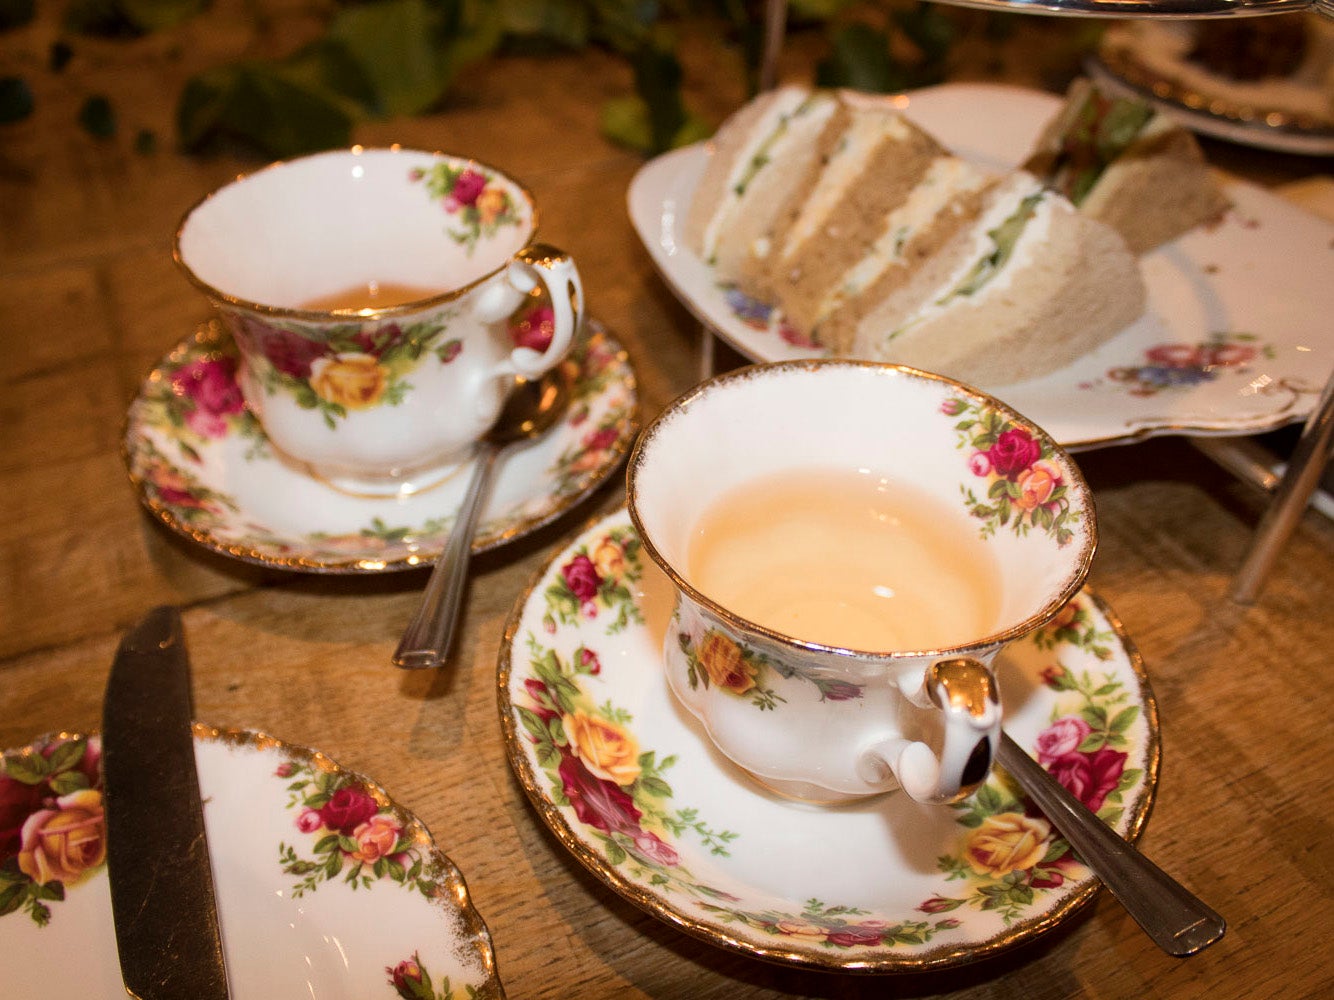 Afternoon tea is what The Angel does best, and helped secure its Welsh Hotel of the Year award for 2016-2017